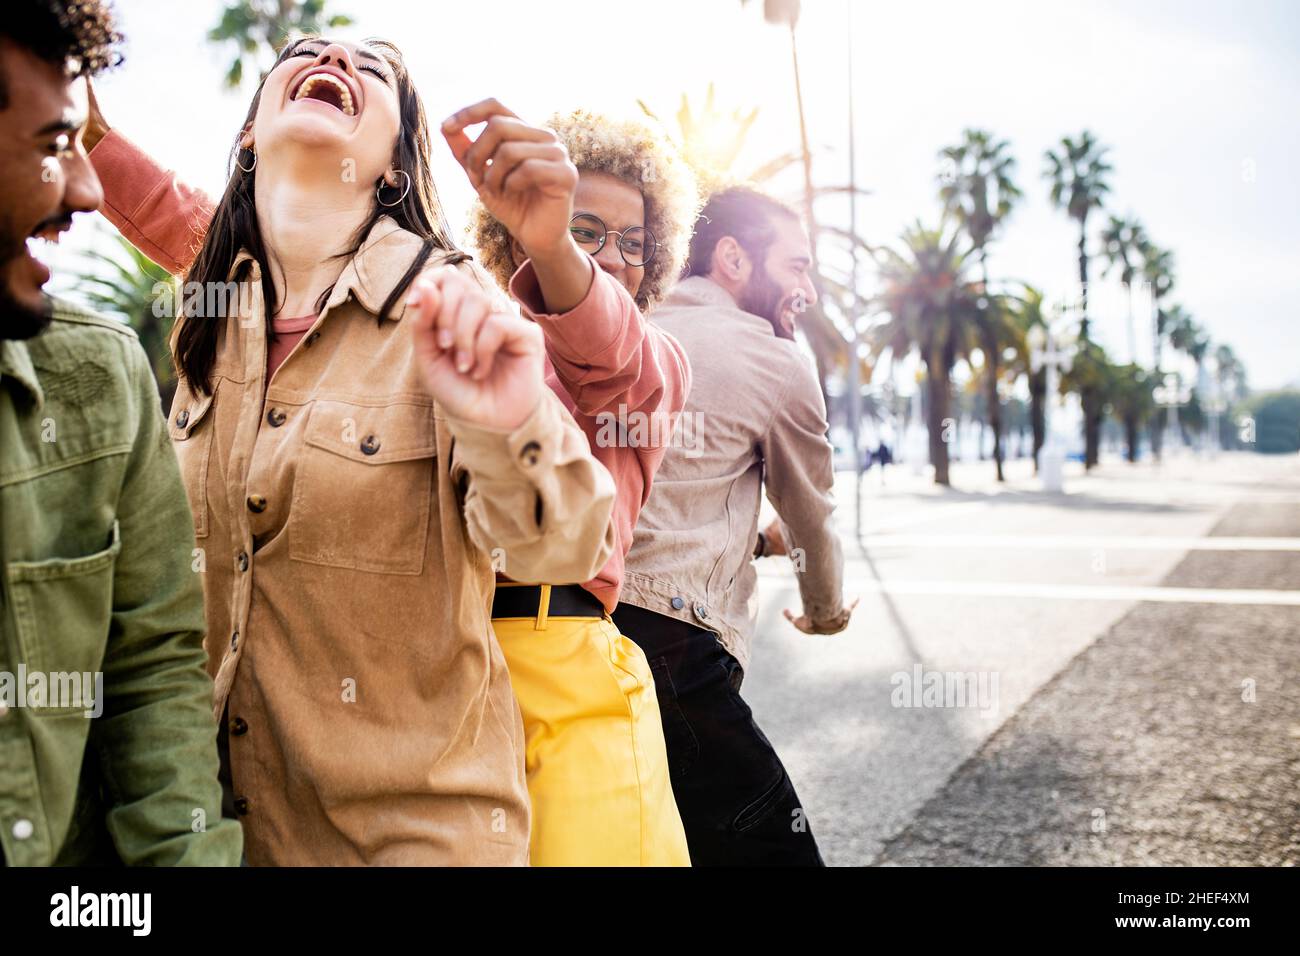 Funny group of multiracial friends dancing twerking in the street Stock Photo